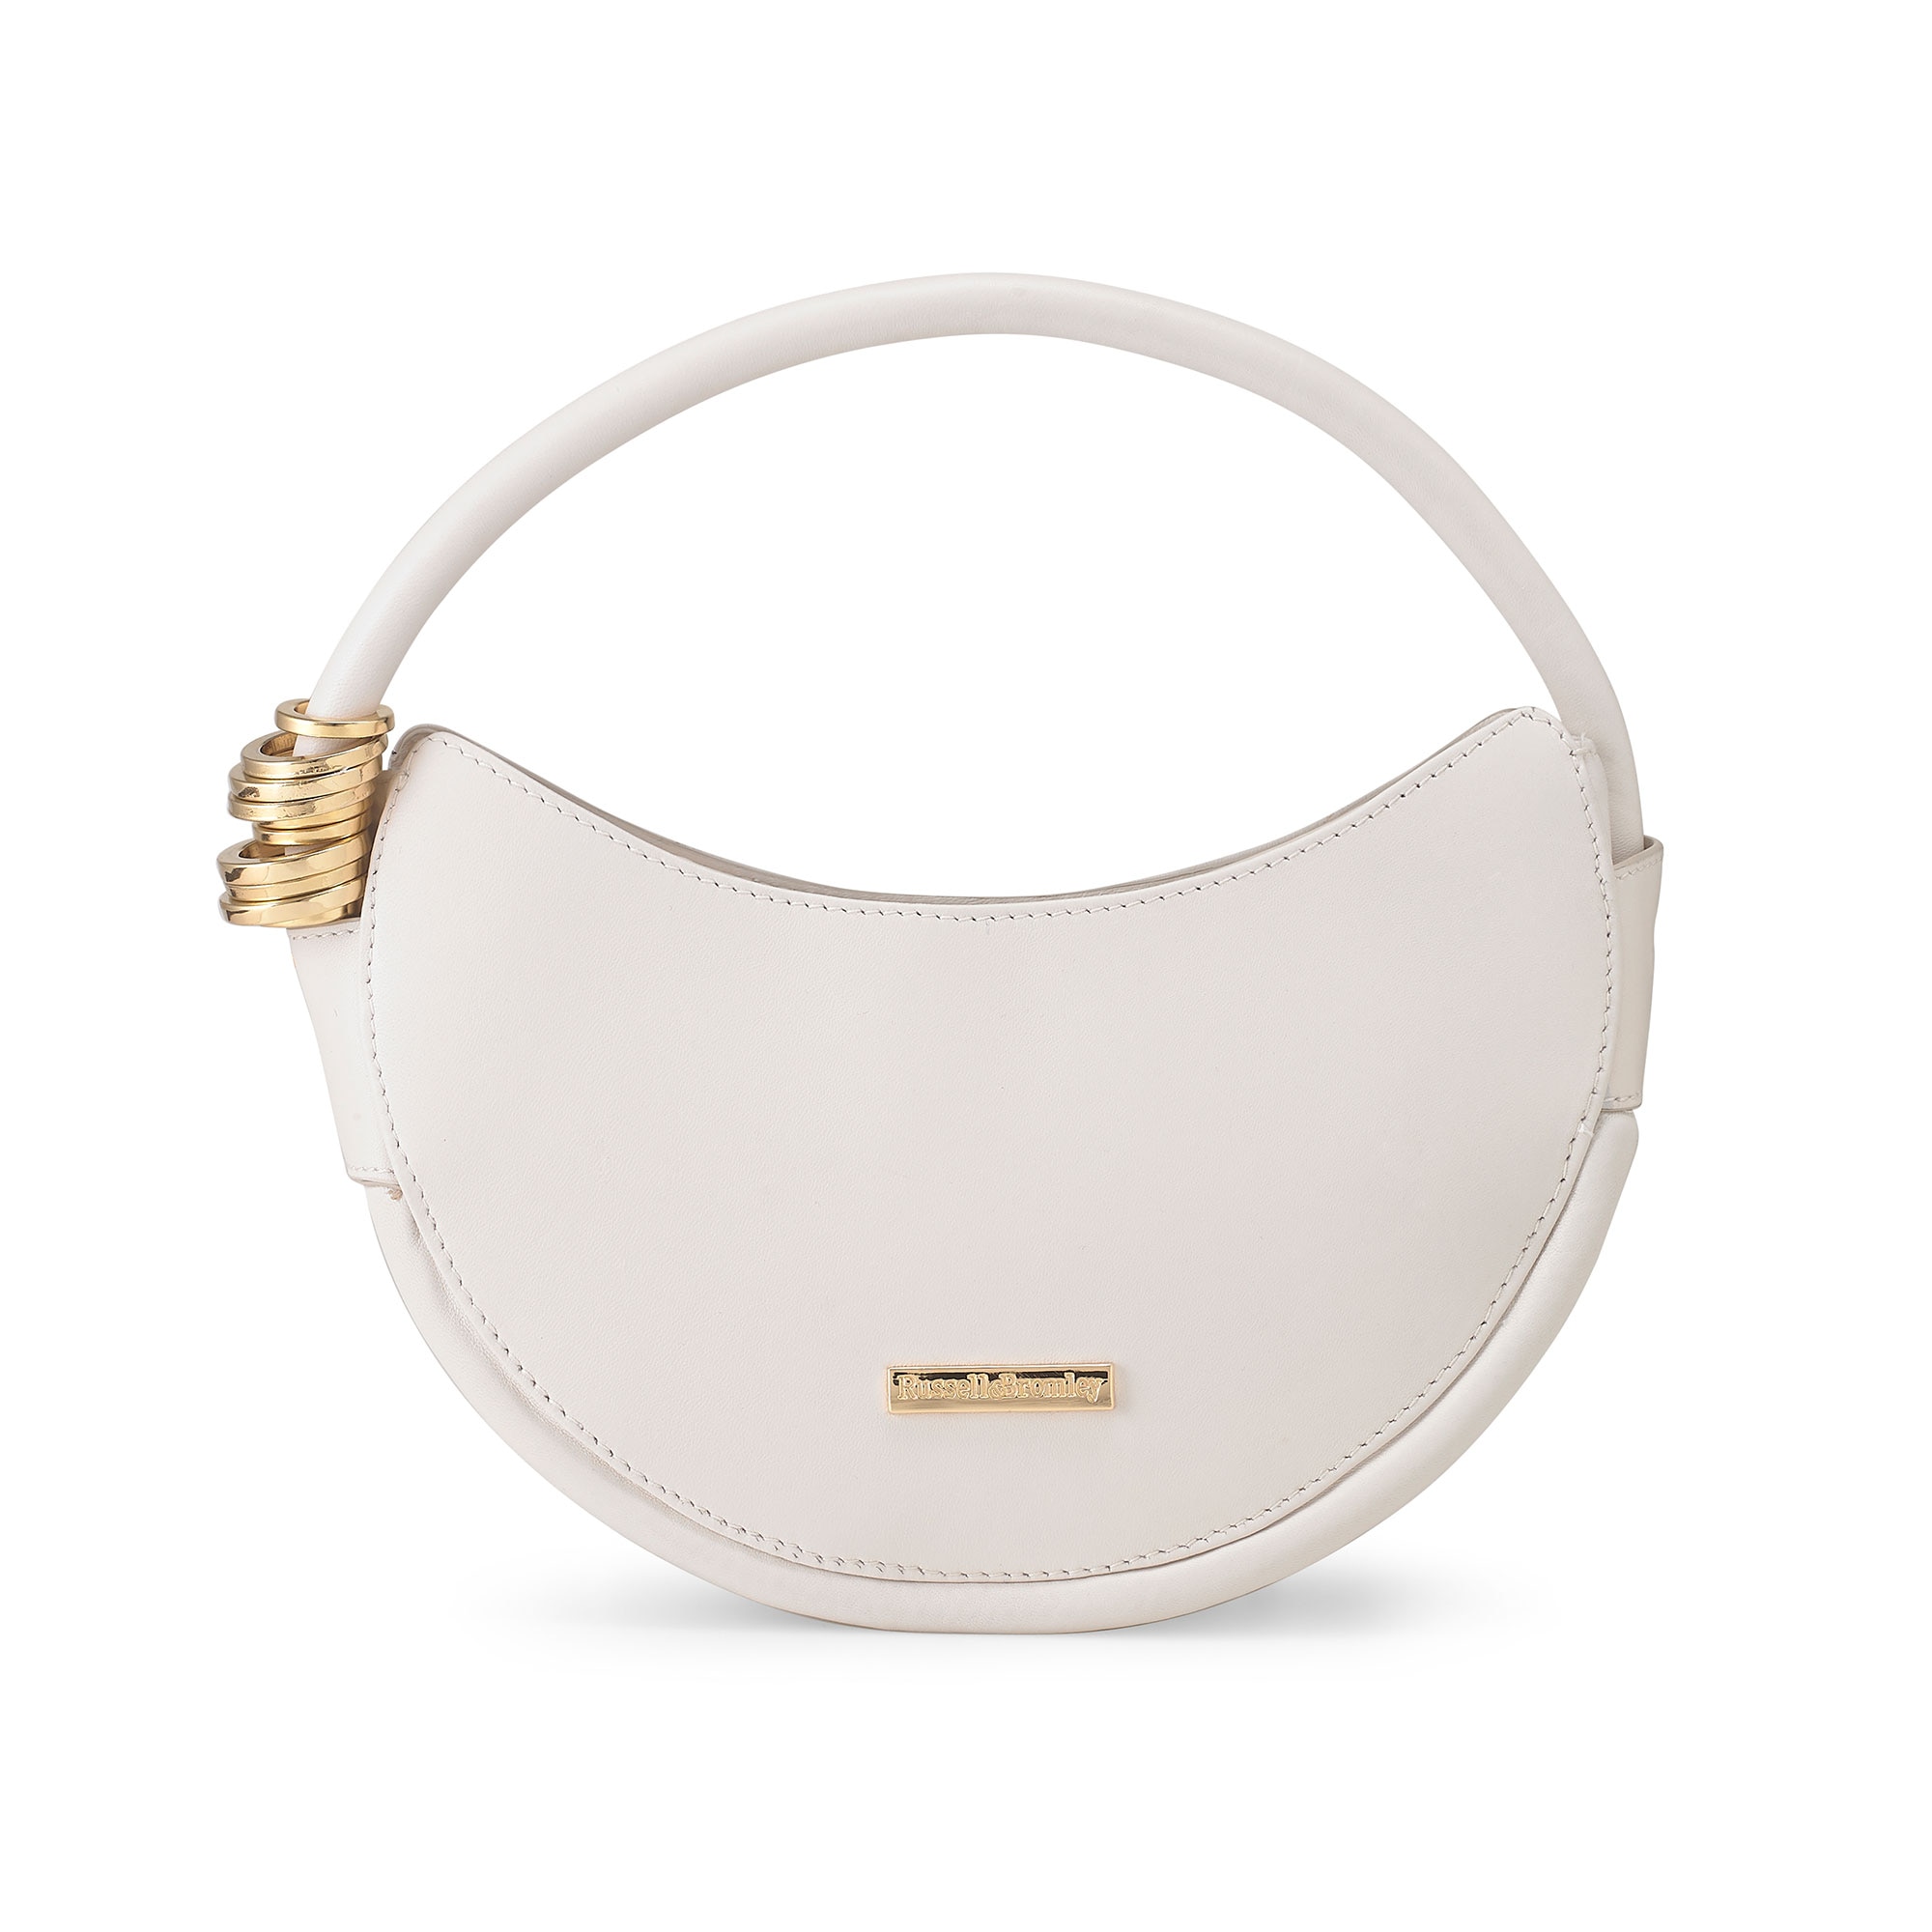 Russell & Bromley Women's Beige Nappa Leather Circoloco Circular Shoulder Bag, Size: 25x14x7cm